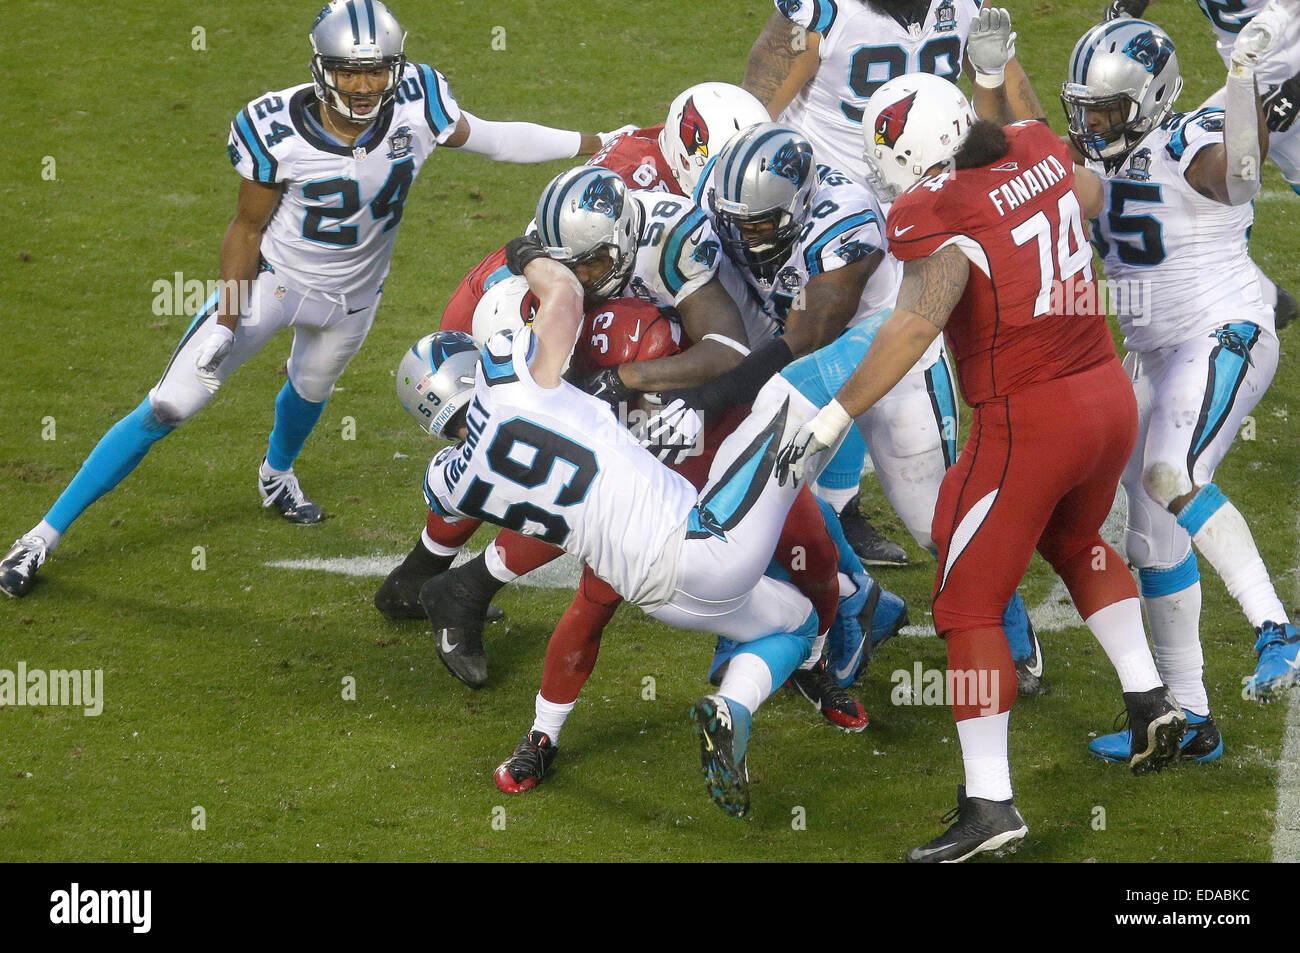 Charlotte, NC, USA. 3rd Jan, 2015. The Carolina Panthers defense swarms Arizona Cardinals running back Kerwynn Williams #33 in the NFC wildcard game on January 3, 2015, at Bank of America Stadium in Charlotte, North Carolina. The Panthers defeated the Cardinals 27-16. Margaret Bowles/CSM/Alamy Live News Stock Photo